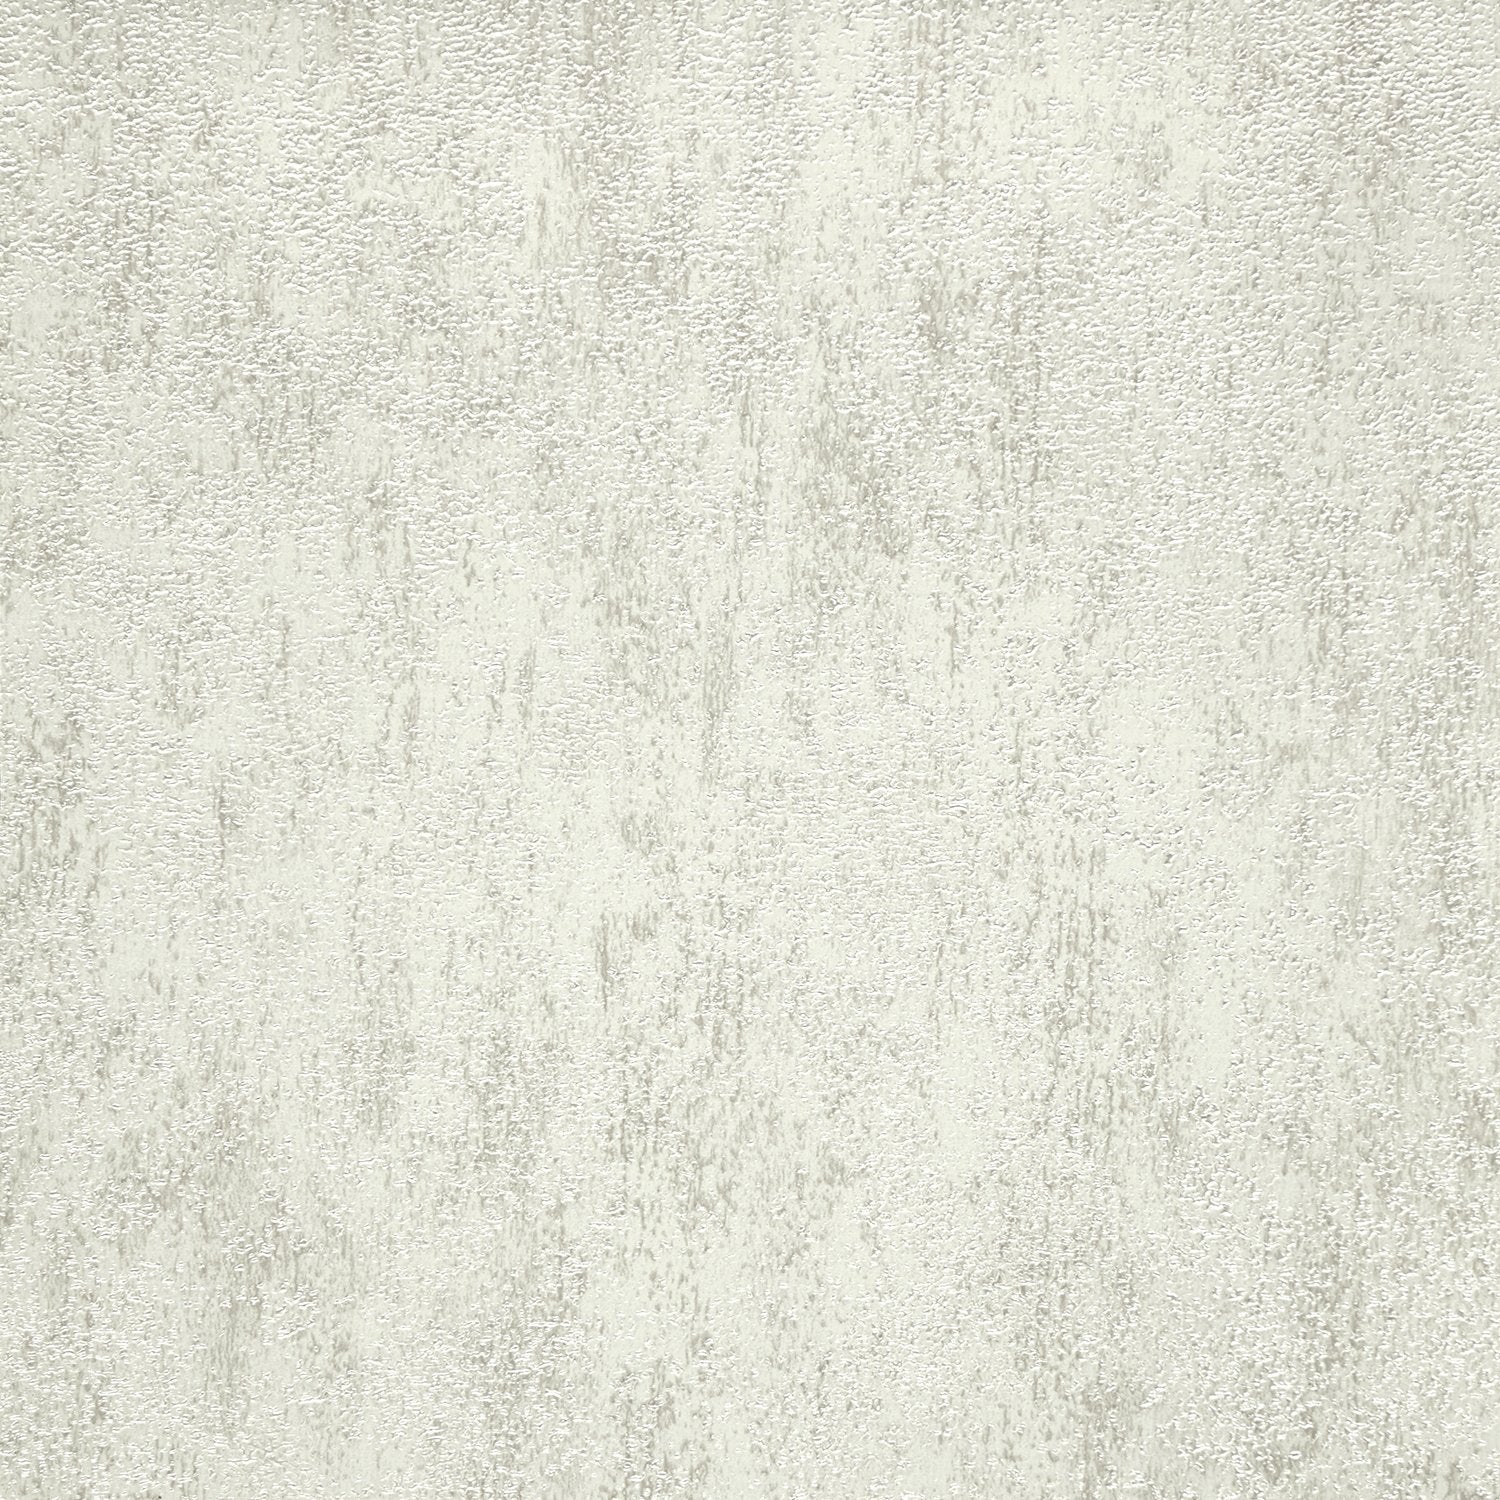 Patina Stone - Y47484 - Wallcovering - Vycon - Kube Contract